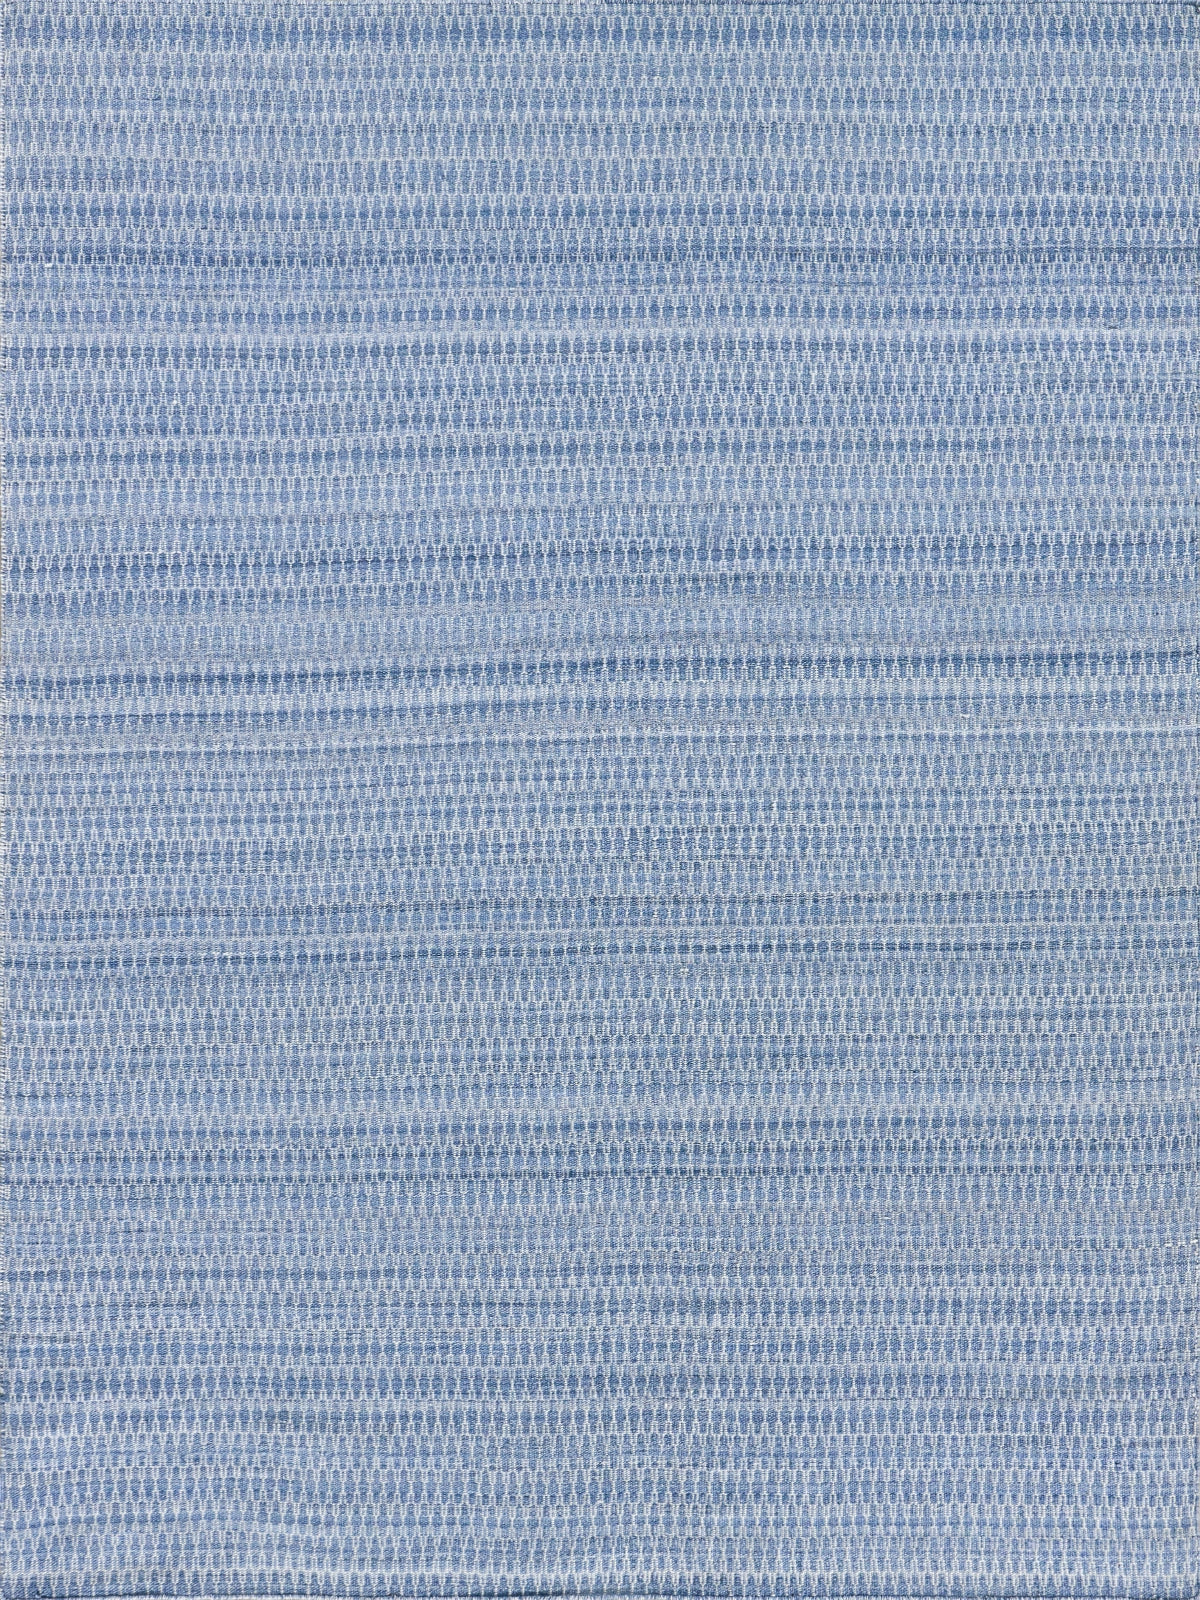 Exquisite Rugs Florence 4879 Light Blue Area Rug